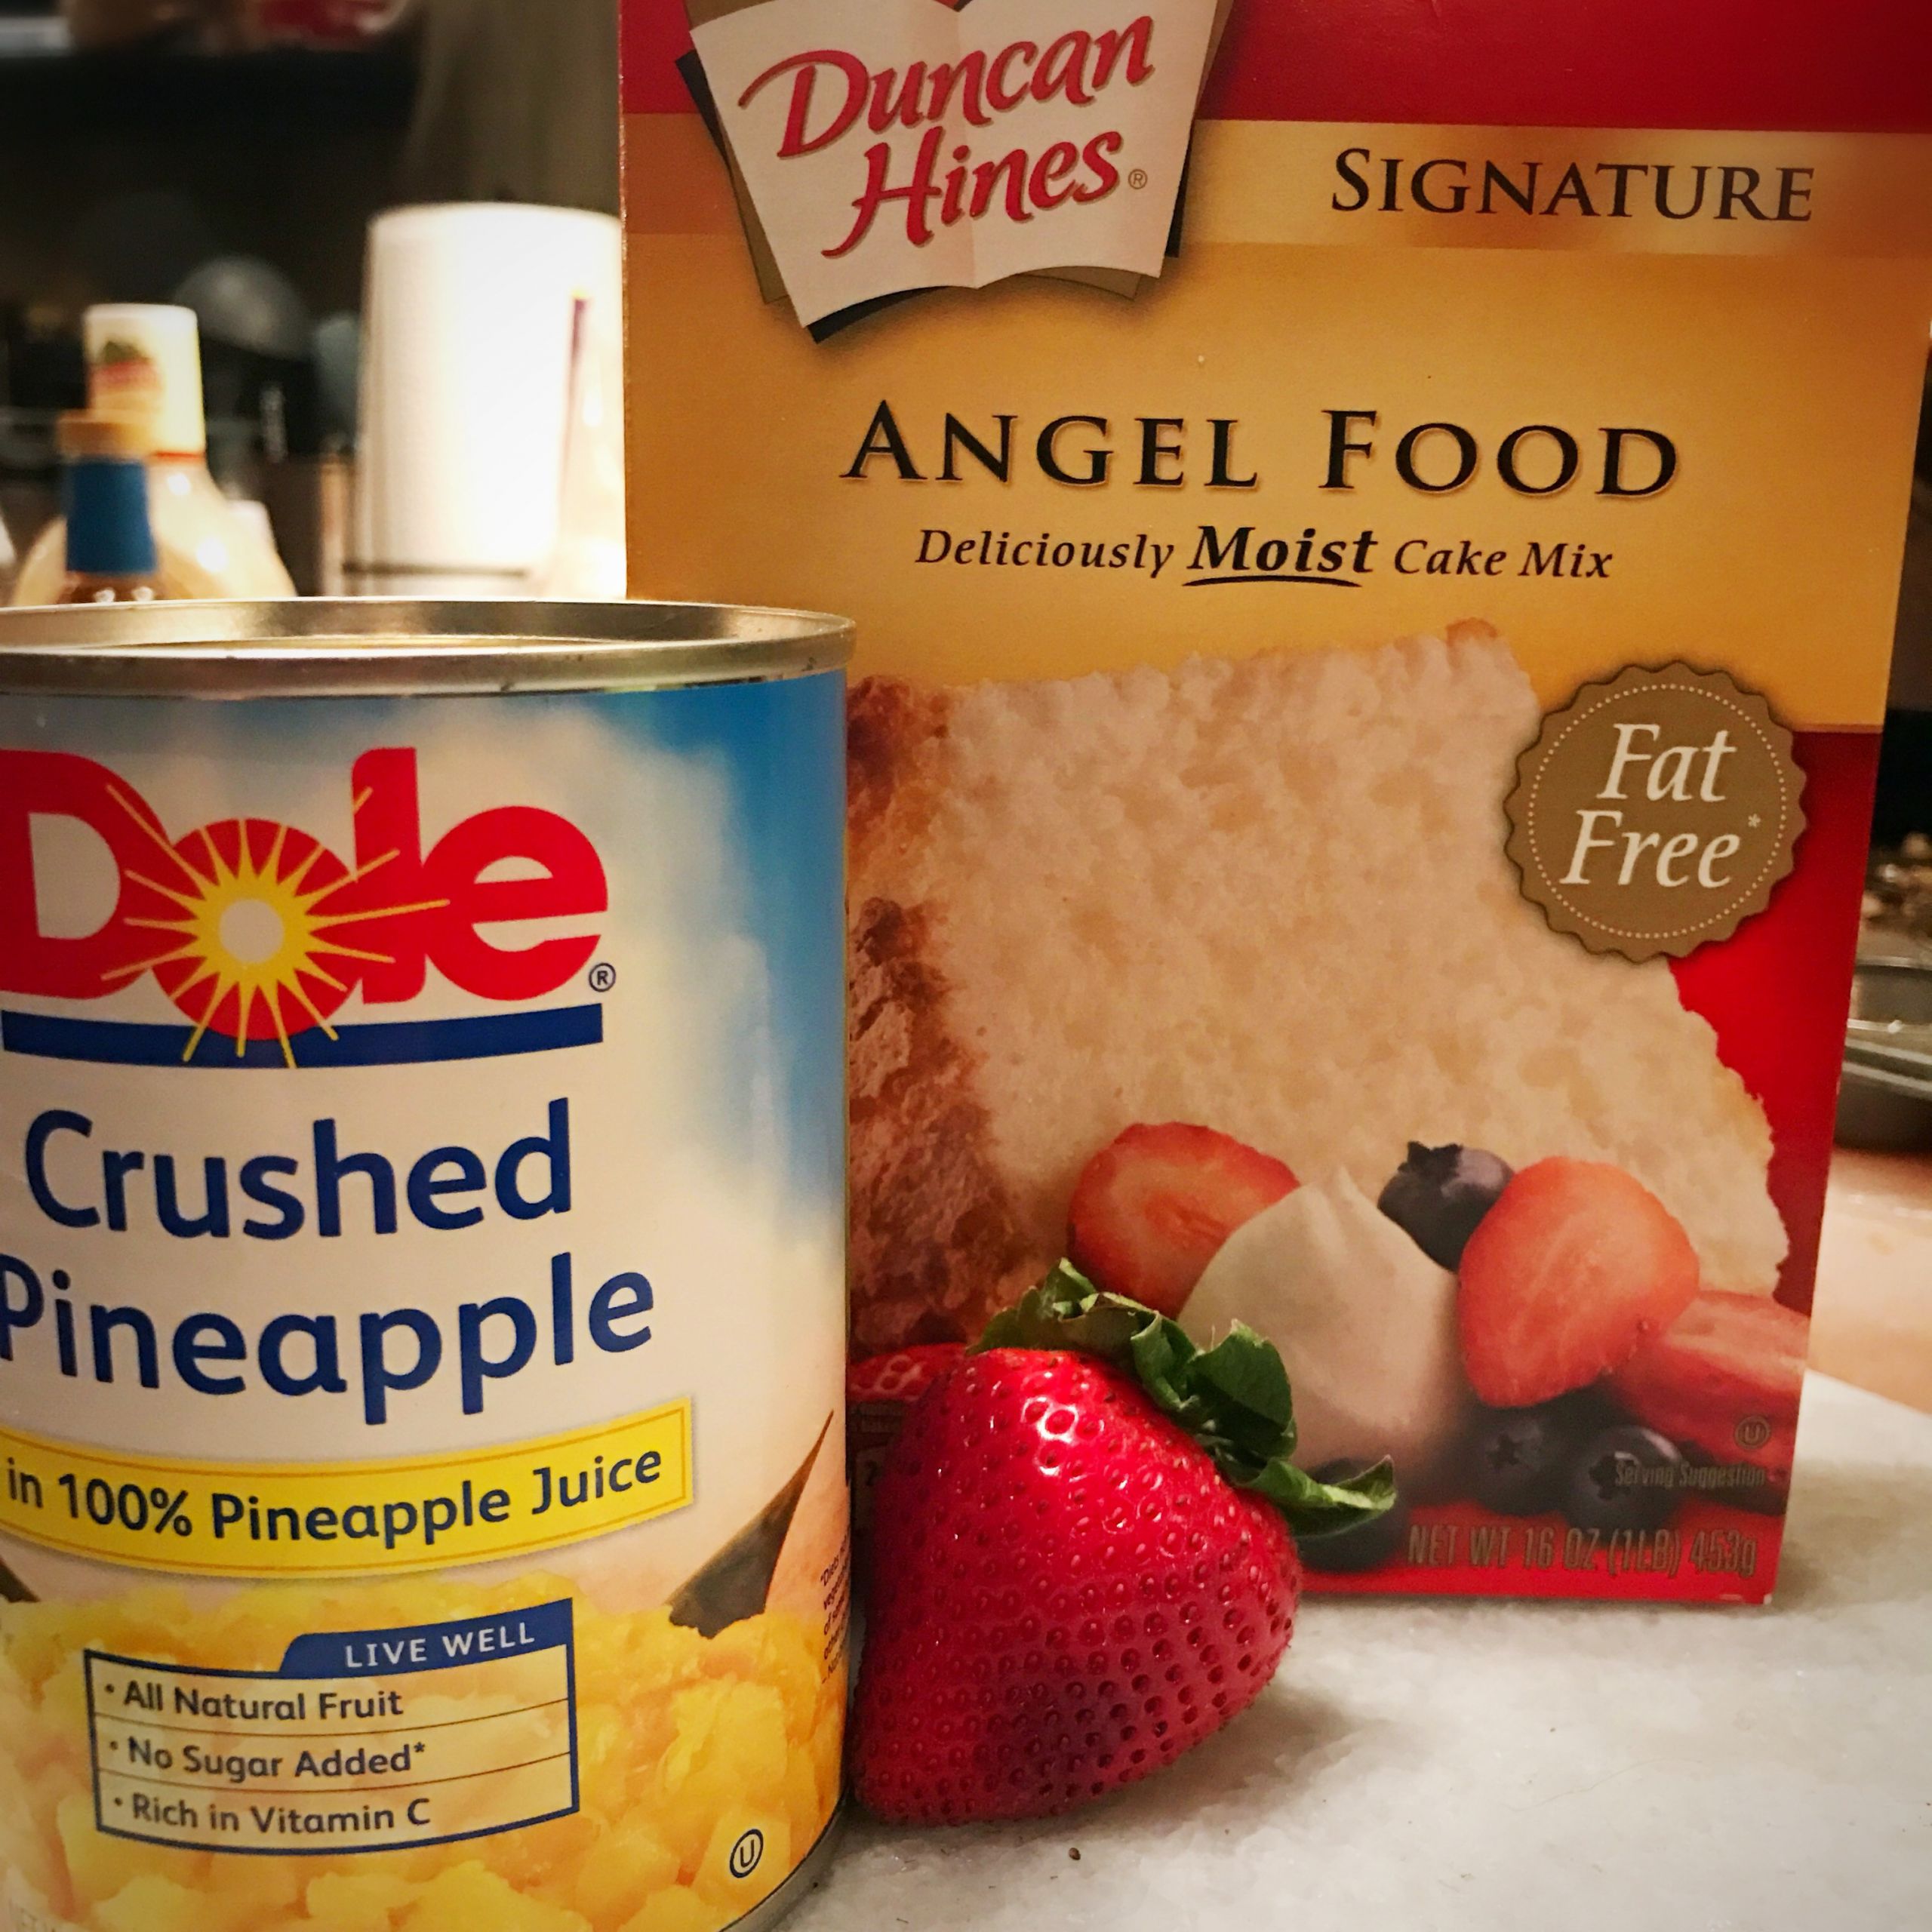 Weight Watcher Angel Food Cake
 Two Ingre nt Pineapple Angel Food Cake 2 4 Weight